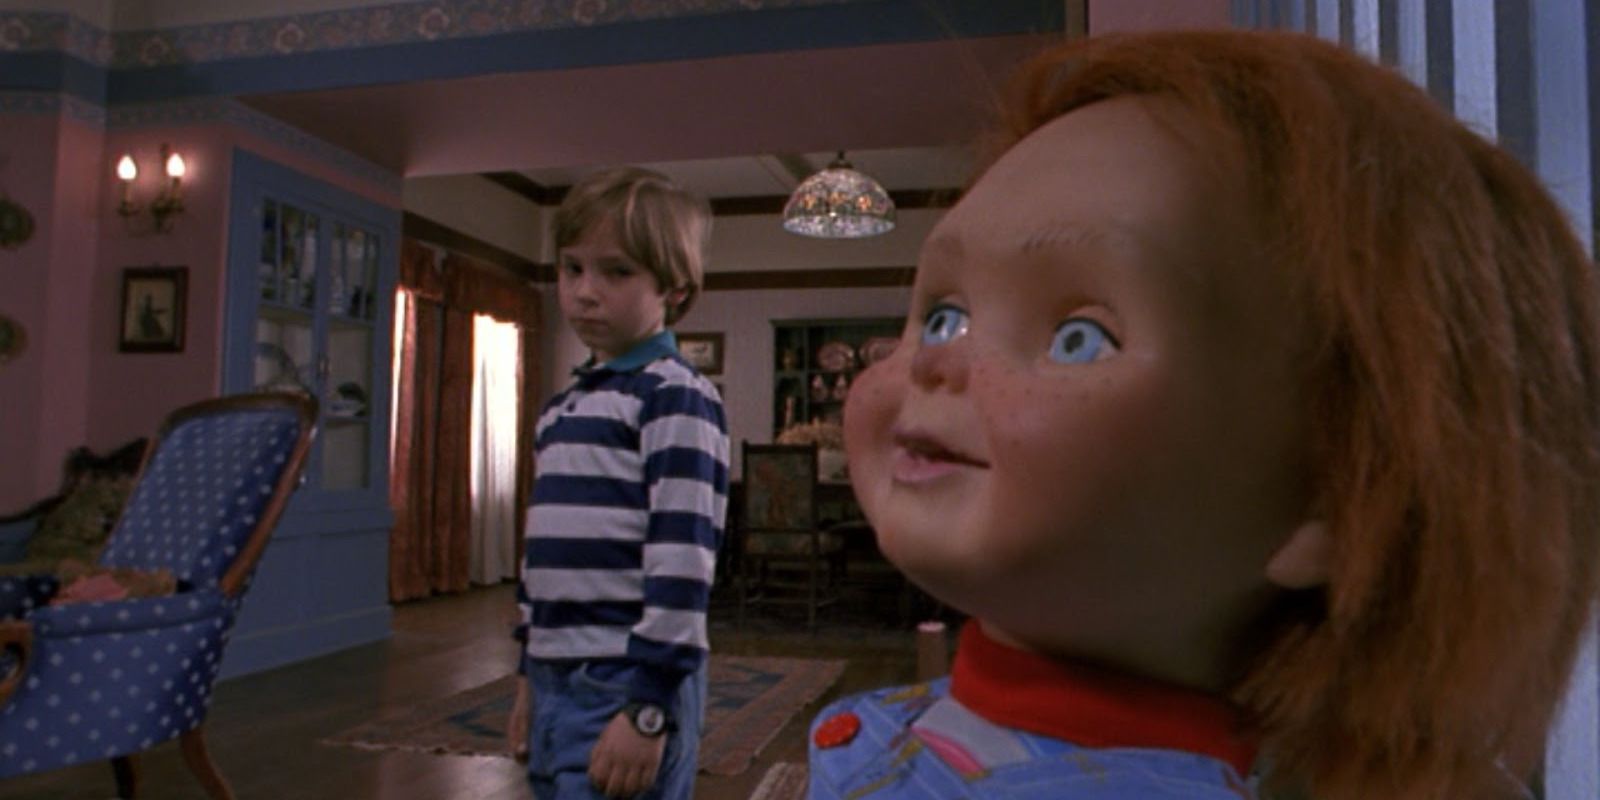 Chucky Doll and His Son Glen Subjects of Texas Amber Alert Message